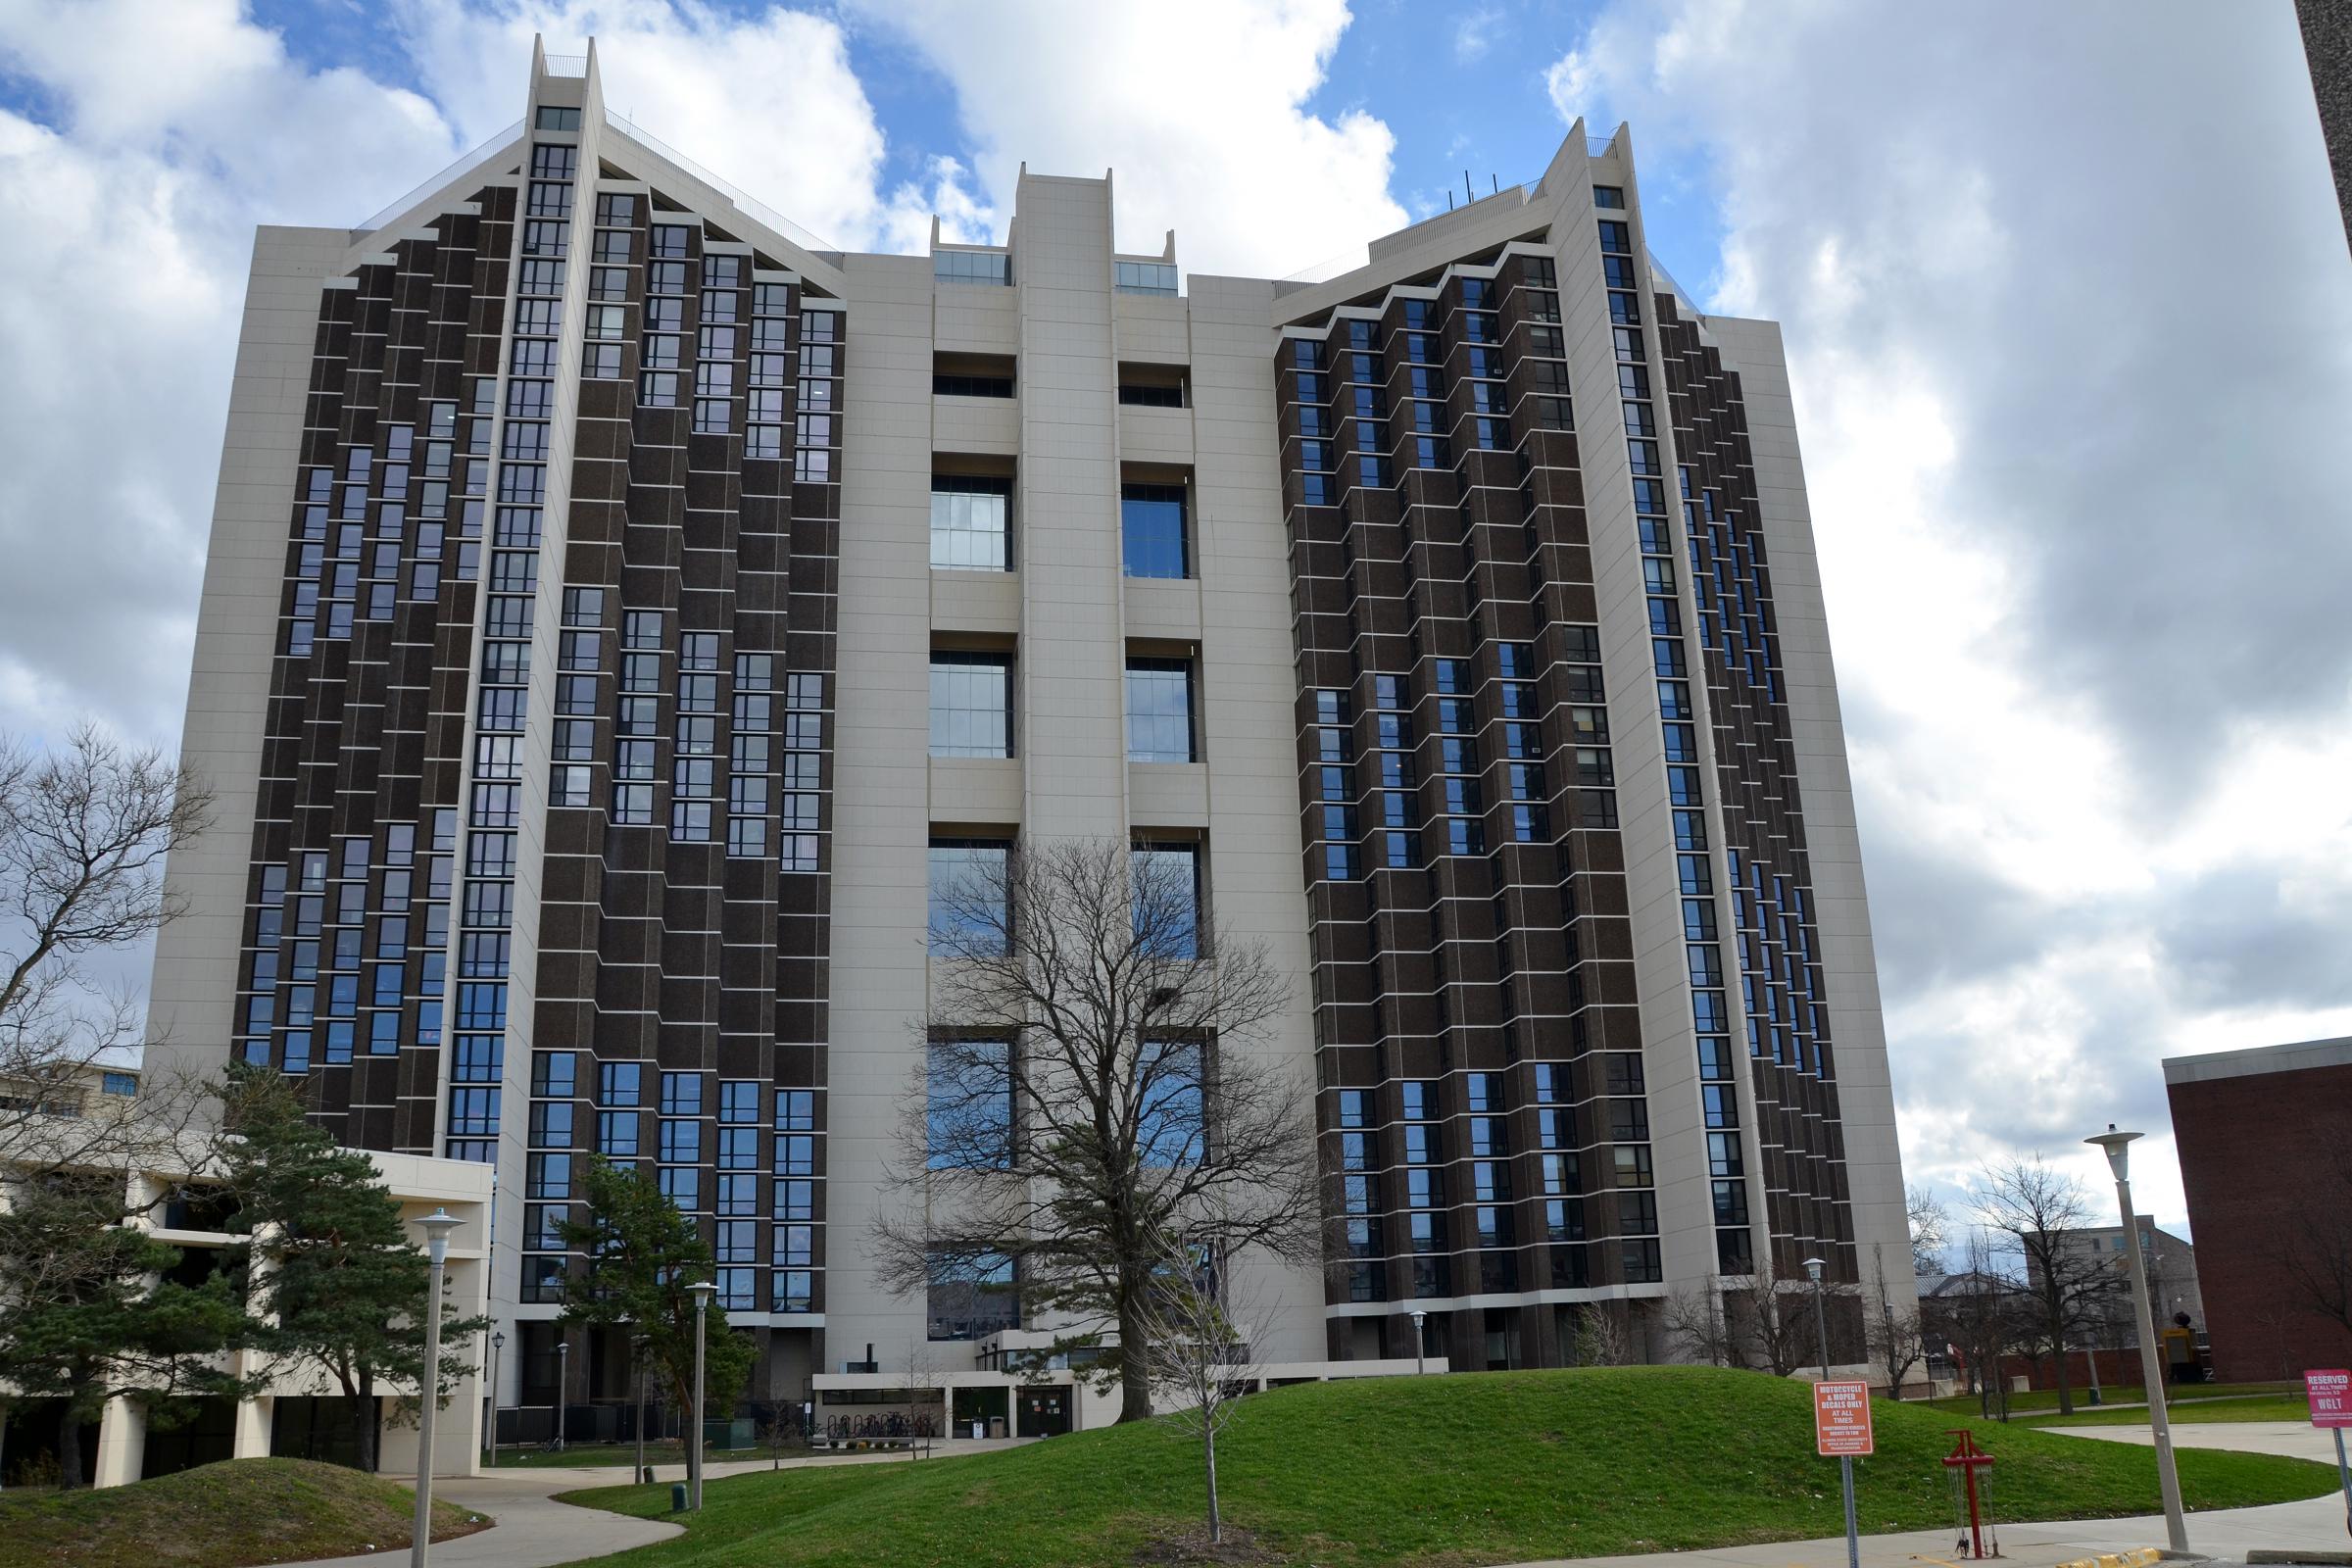 A Brief History of Illinois State University - The Flats at ISU